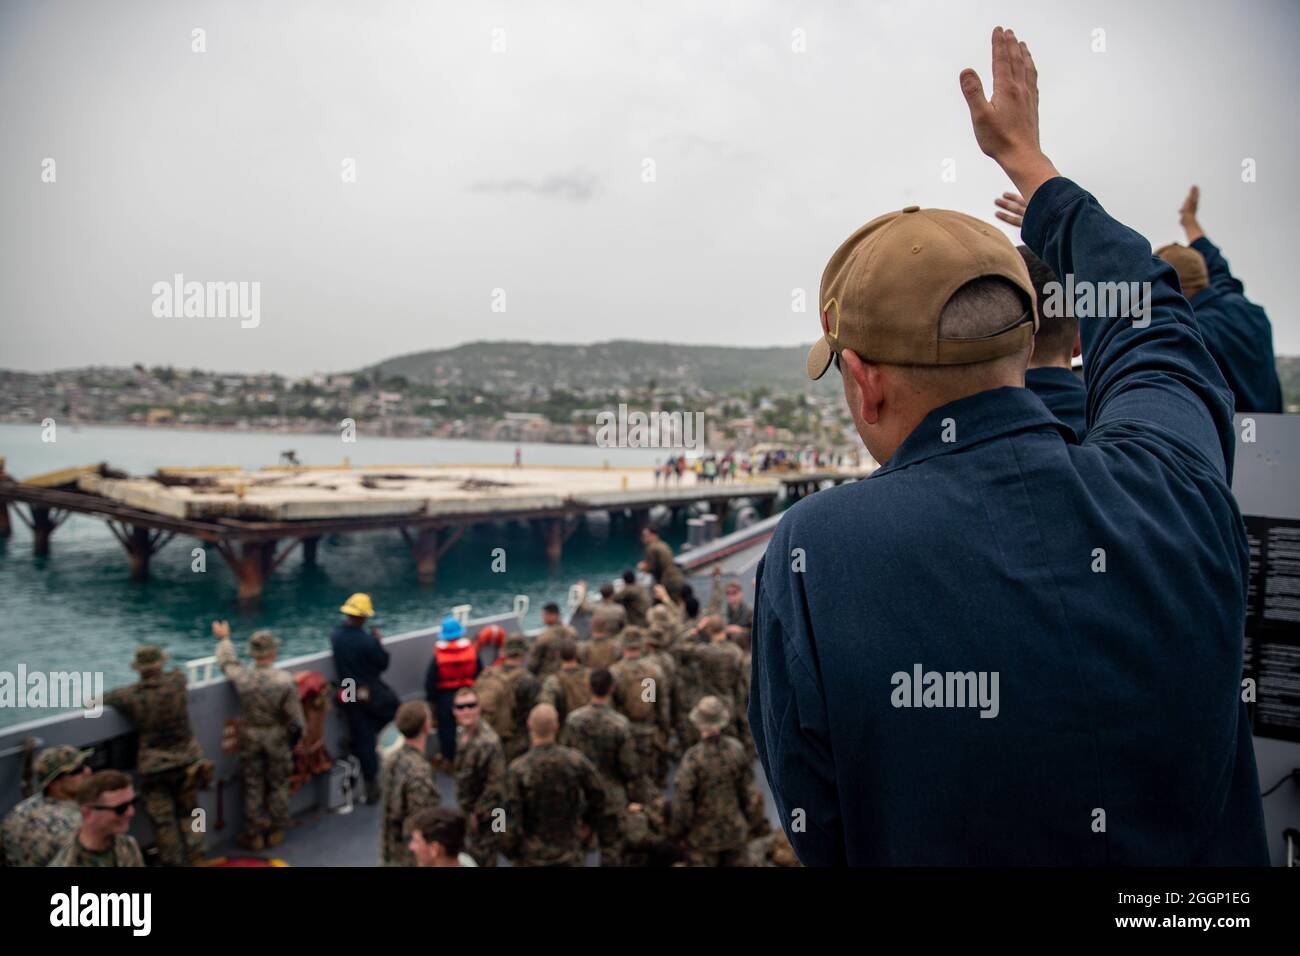 U.S. Sailors and Marines with Joint Task Force-Haiti (JTF-Haiti) wave to locals in Port of Jeremie, Haiti, Aug. 31, 2021. The Marines and sailors aboard the USS Arlington (LPD 24) have been working in support of JTF-Haiti for a humanitarian assistance and disaster relief mission. (U.S. Marine Corps photo by Cpl. Alize Sotelo) Stock Photo